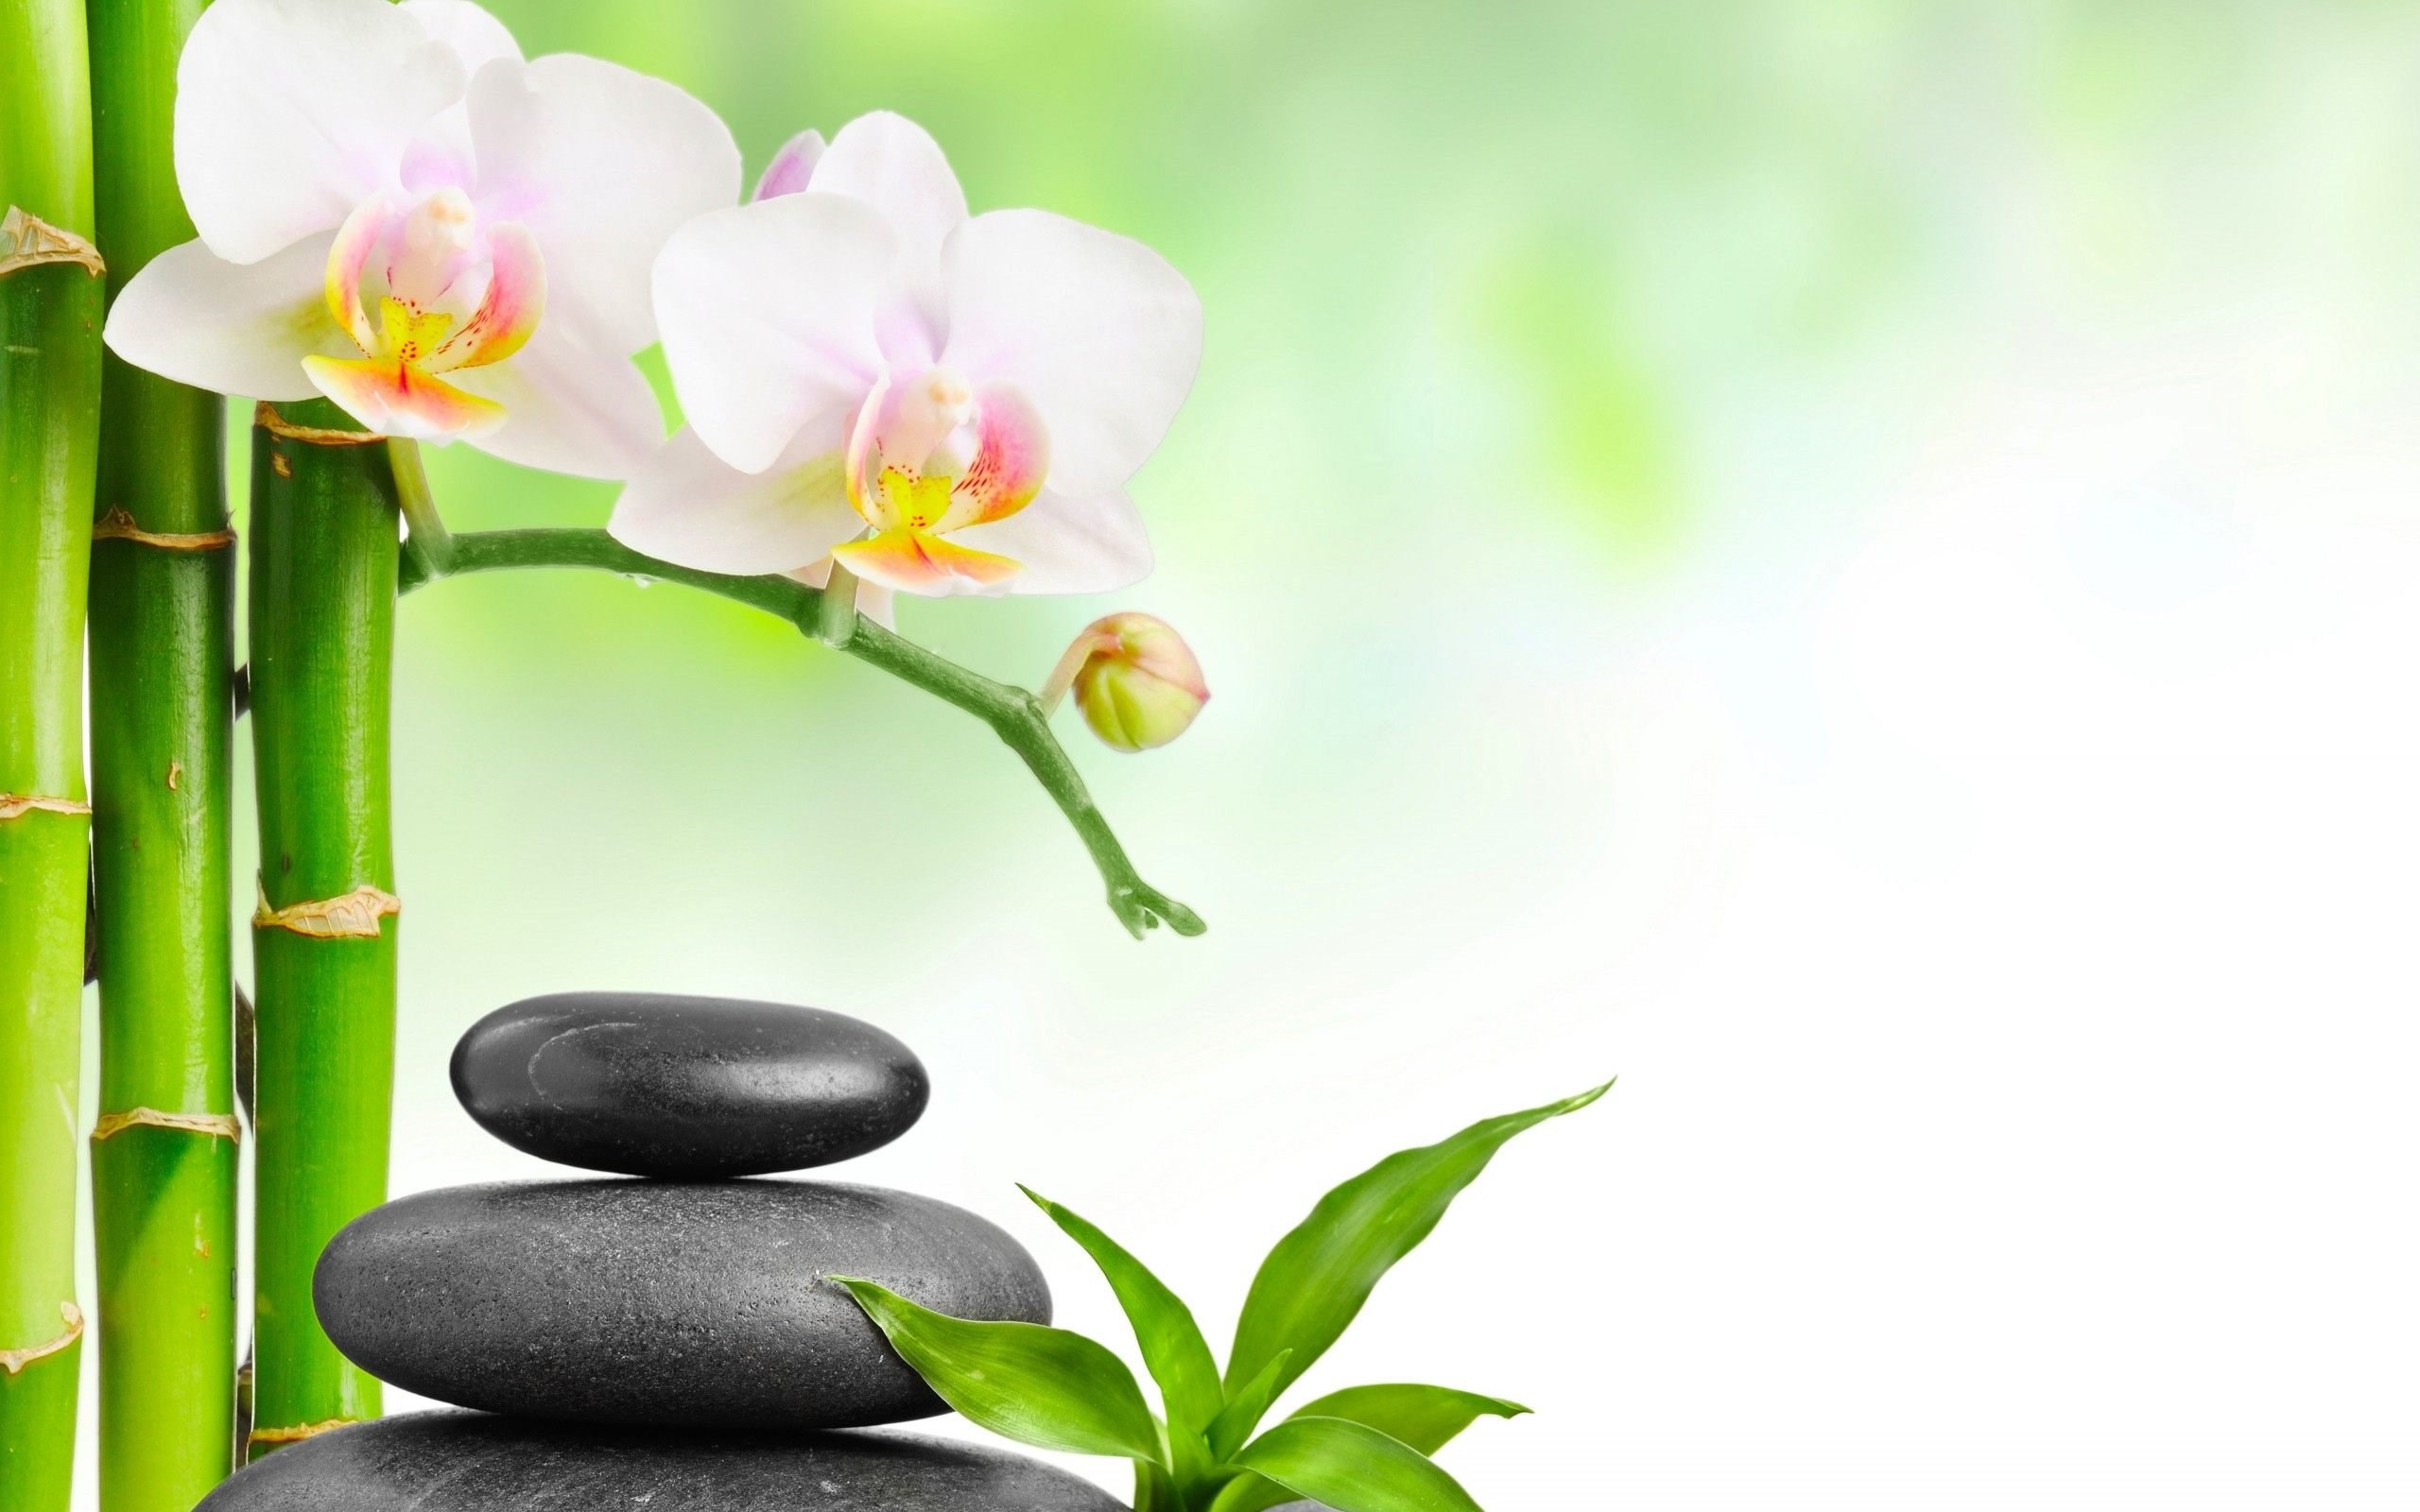 Spa Stones Bamboo Pink Flower Wallpapers Hd For Desktop - Today Special Good Morning - HD Wallpaper 